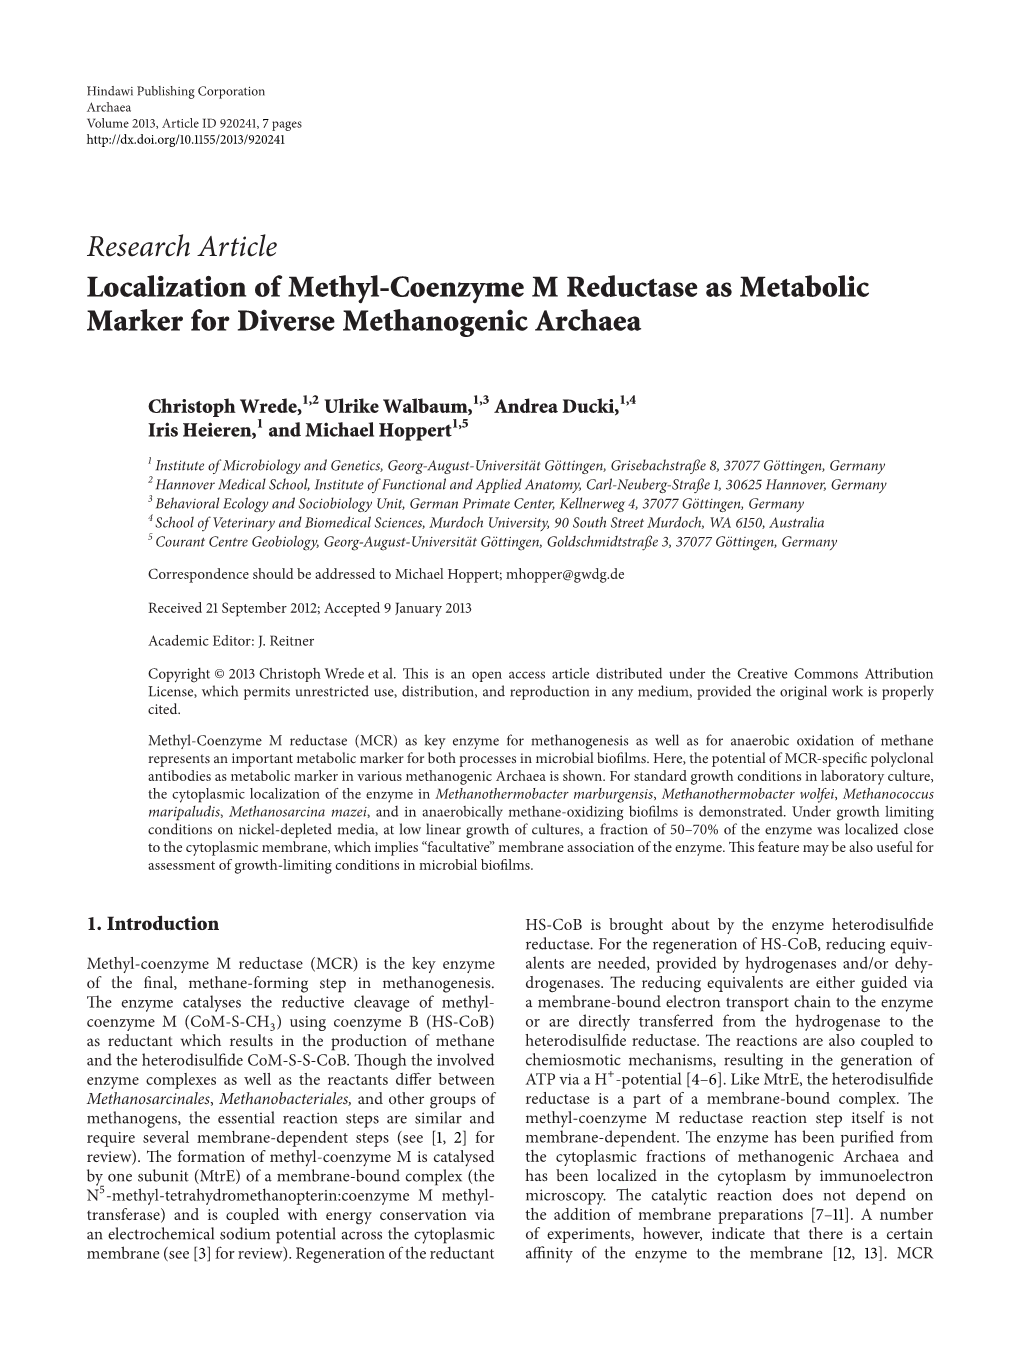 Localization of Methyl-Coenzyme M Reductase As Metabolic Marker for Diverse Methanogenic Archaea